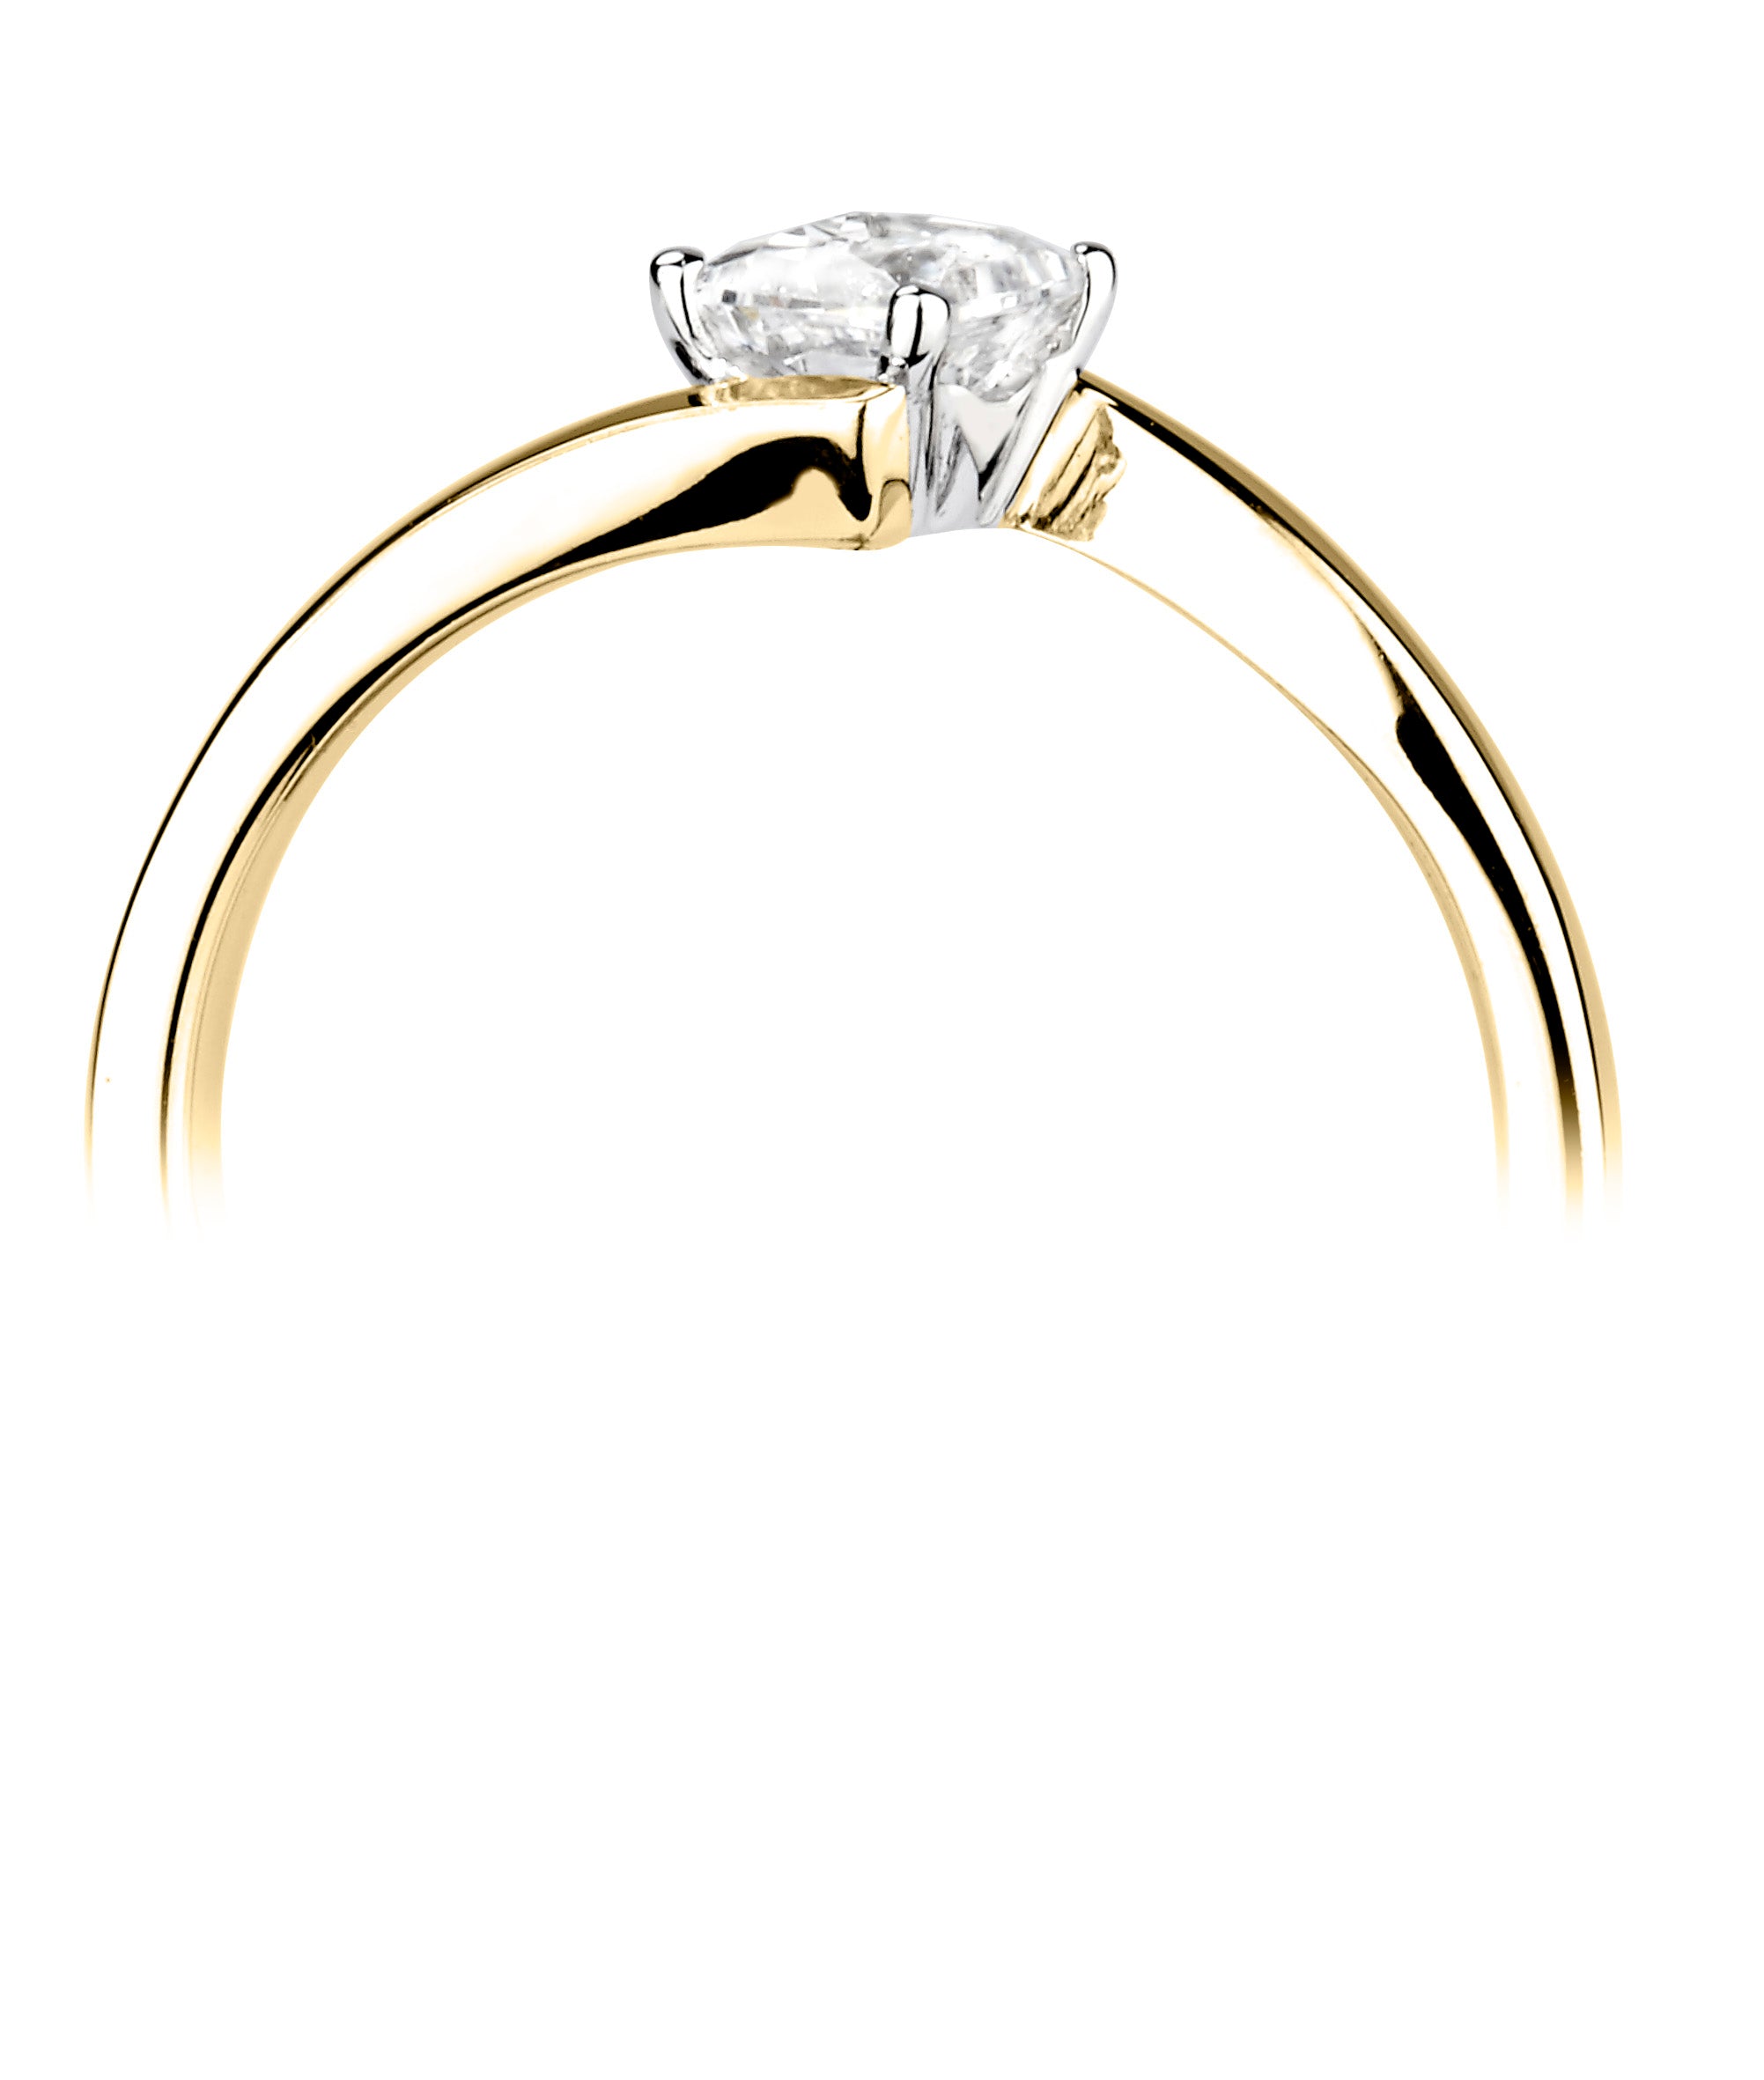 18CT Yellow Gold Princess Cut Diamond Cross Over Solitaire Ring